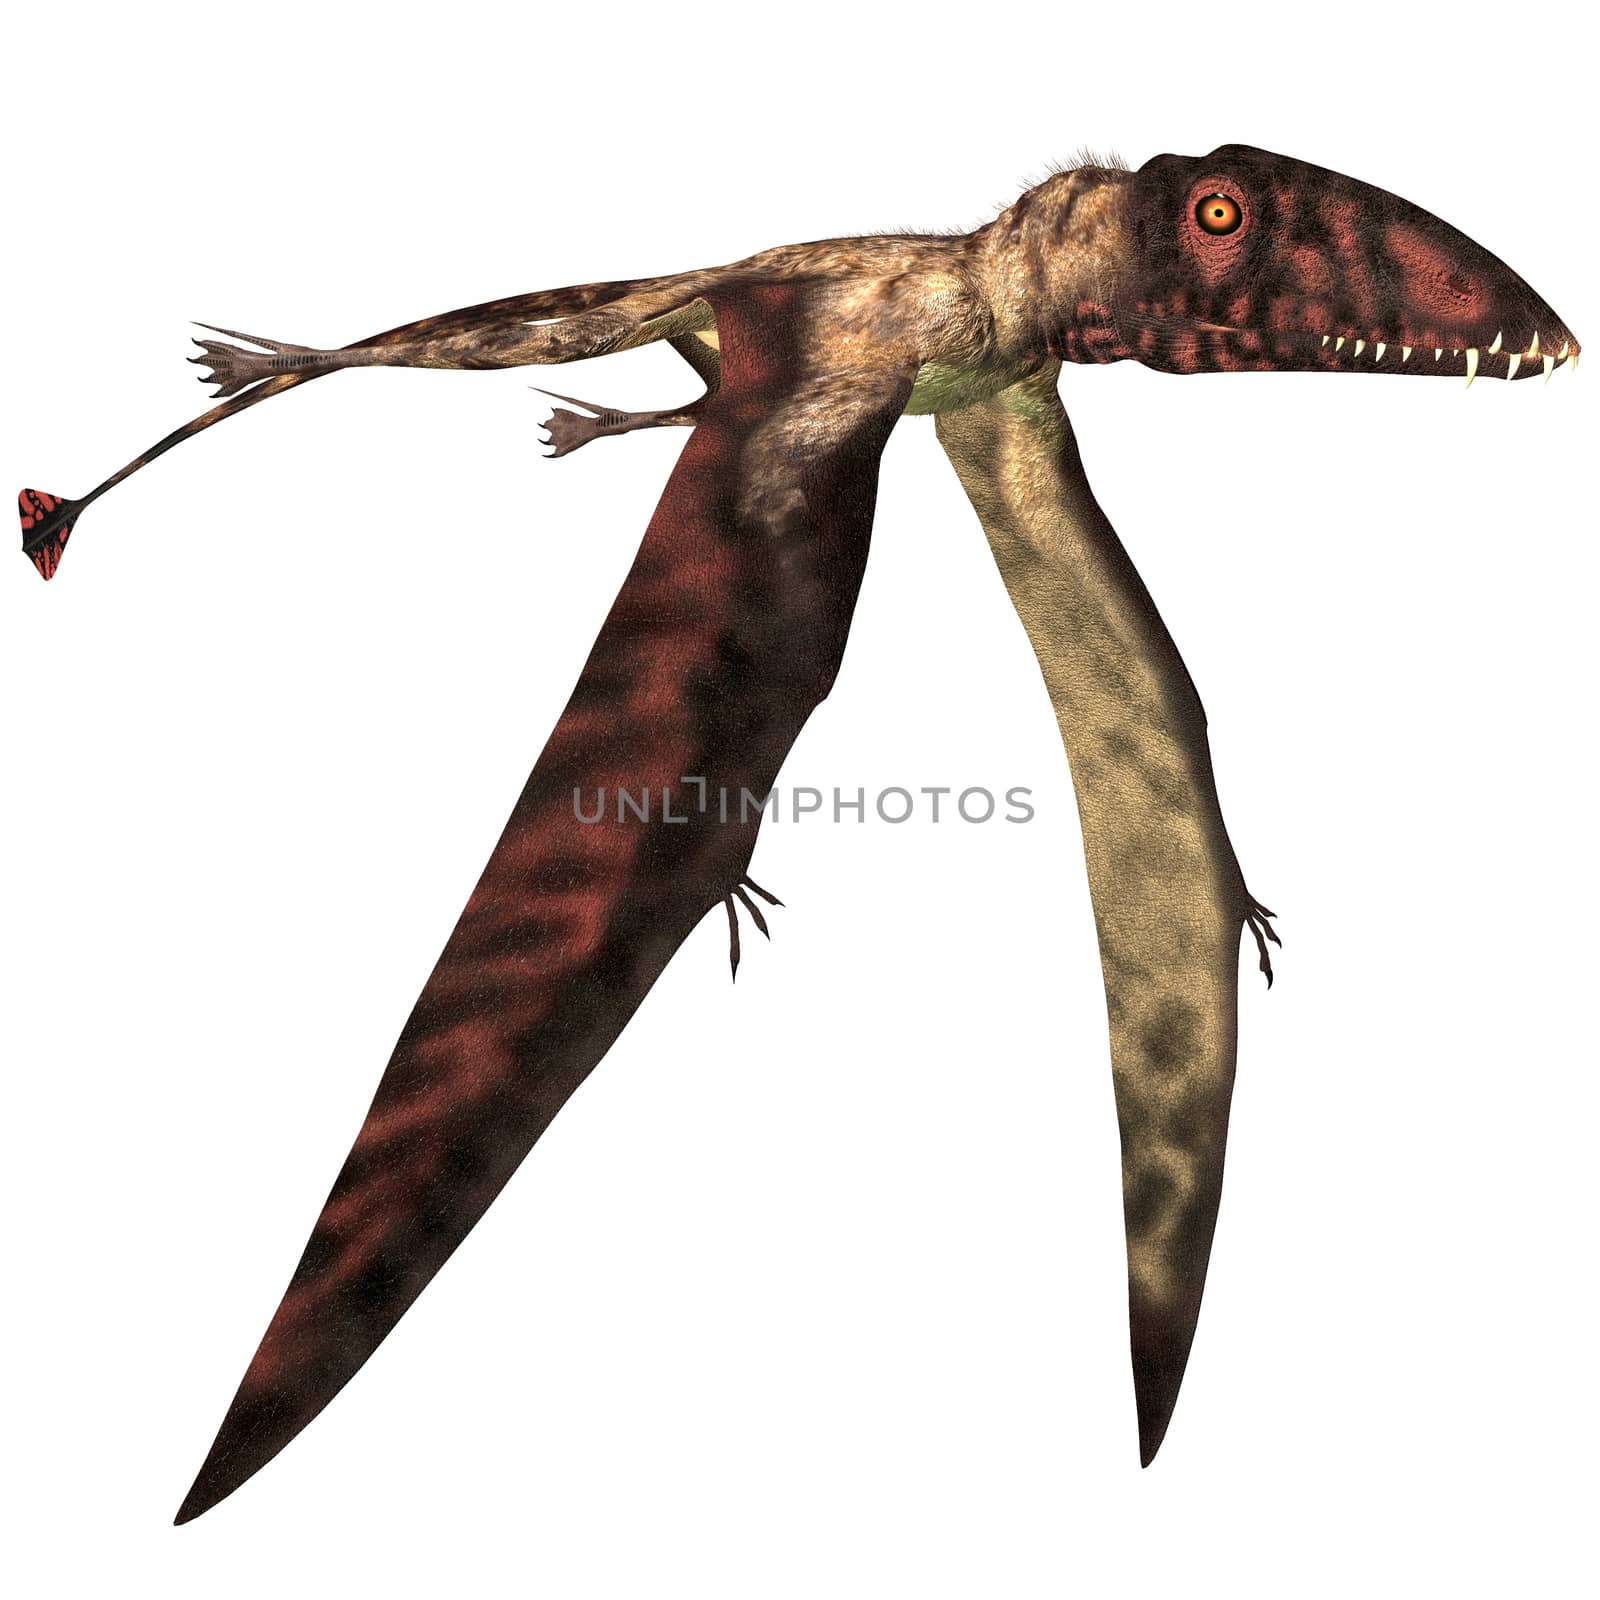 Dimorphodon was a carnivorous Pterosaur that lived in England during the Jurassic Period.